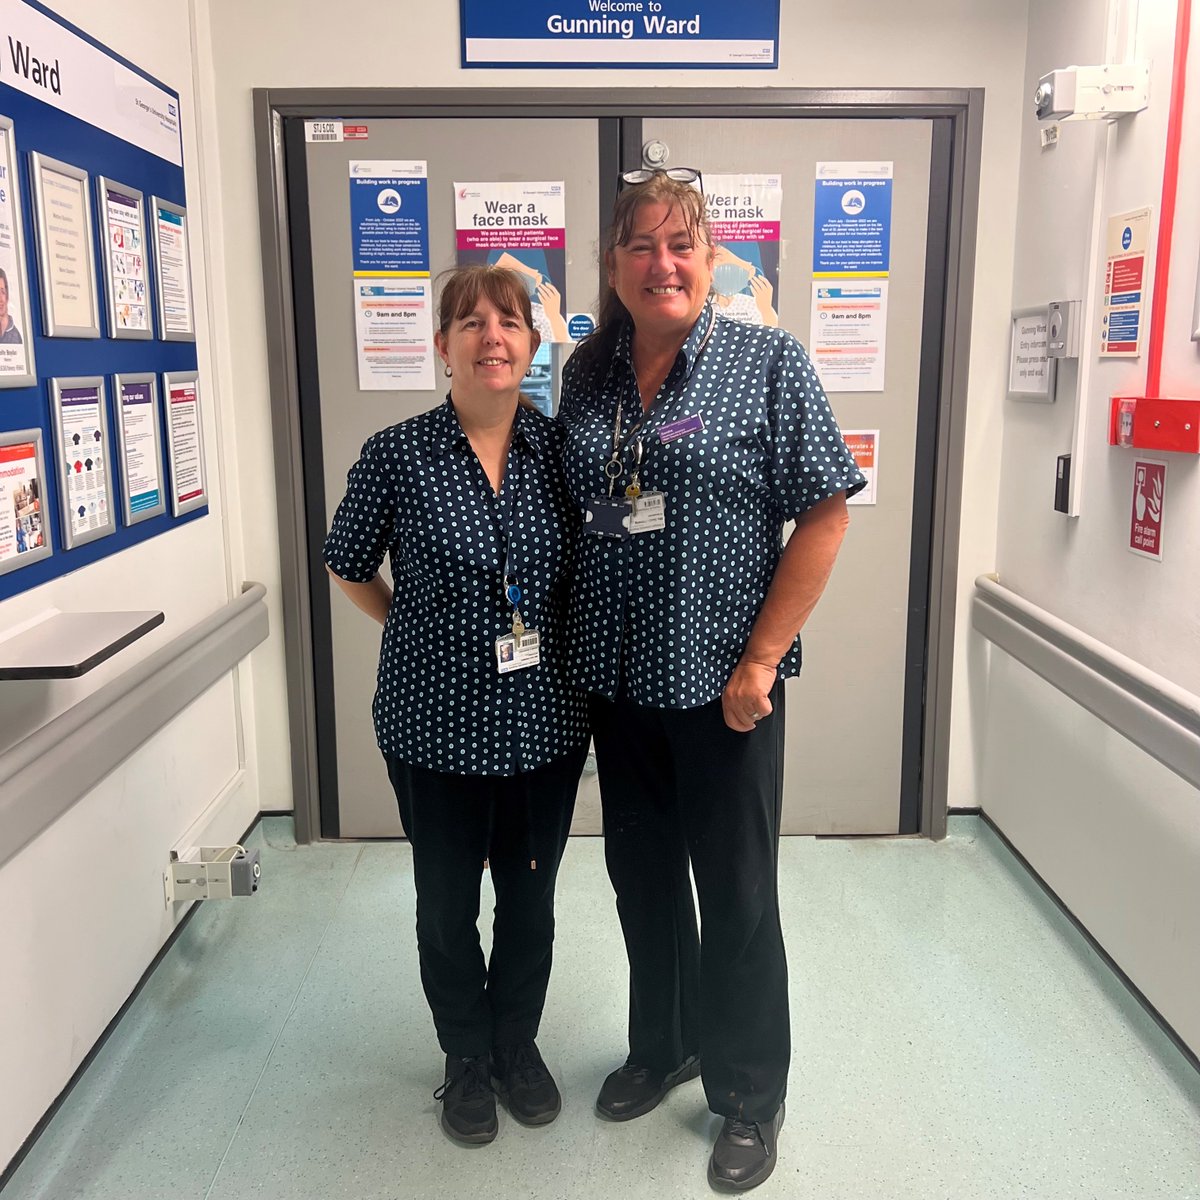 Happy Friday from the ward teams @StGeorgesTrust. Caring for our #traumapatients 24 hours a day, 7 days a week. 👩‍⚕️💊 #OutstandingCareEveryTime #StGeorges #MajorTrauma #LondonTraumaNetwork #NHS